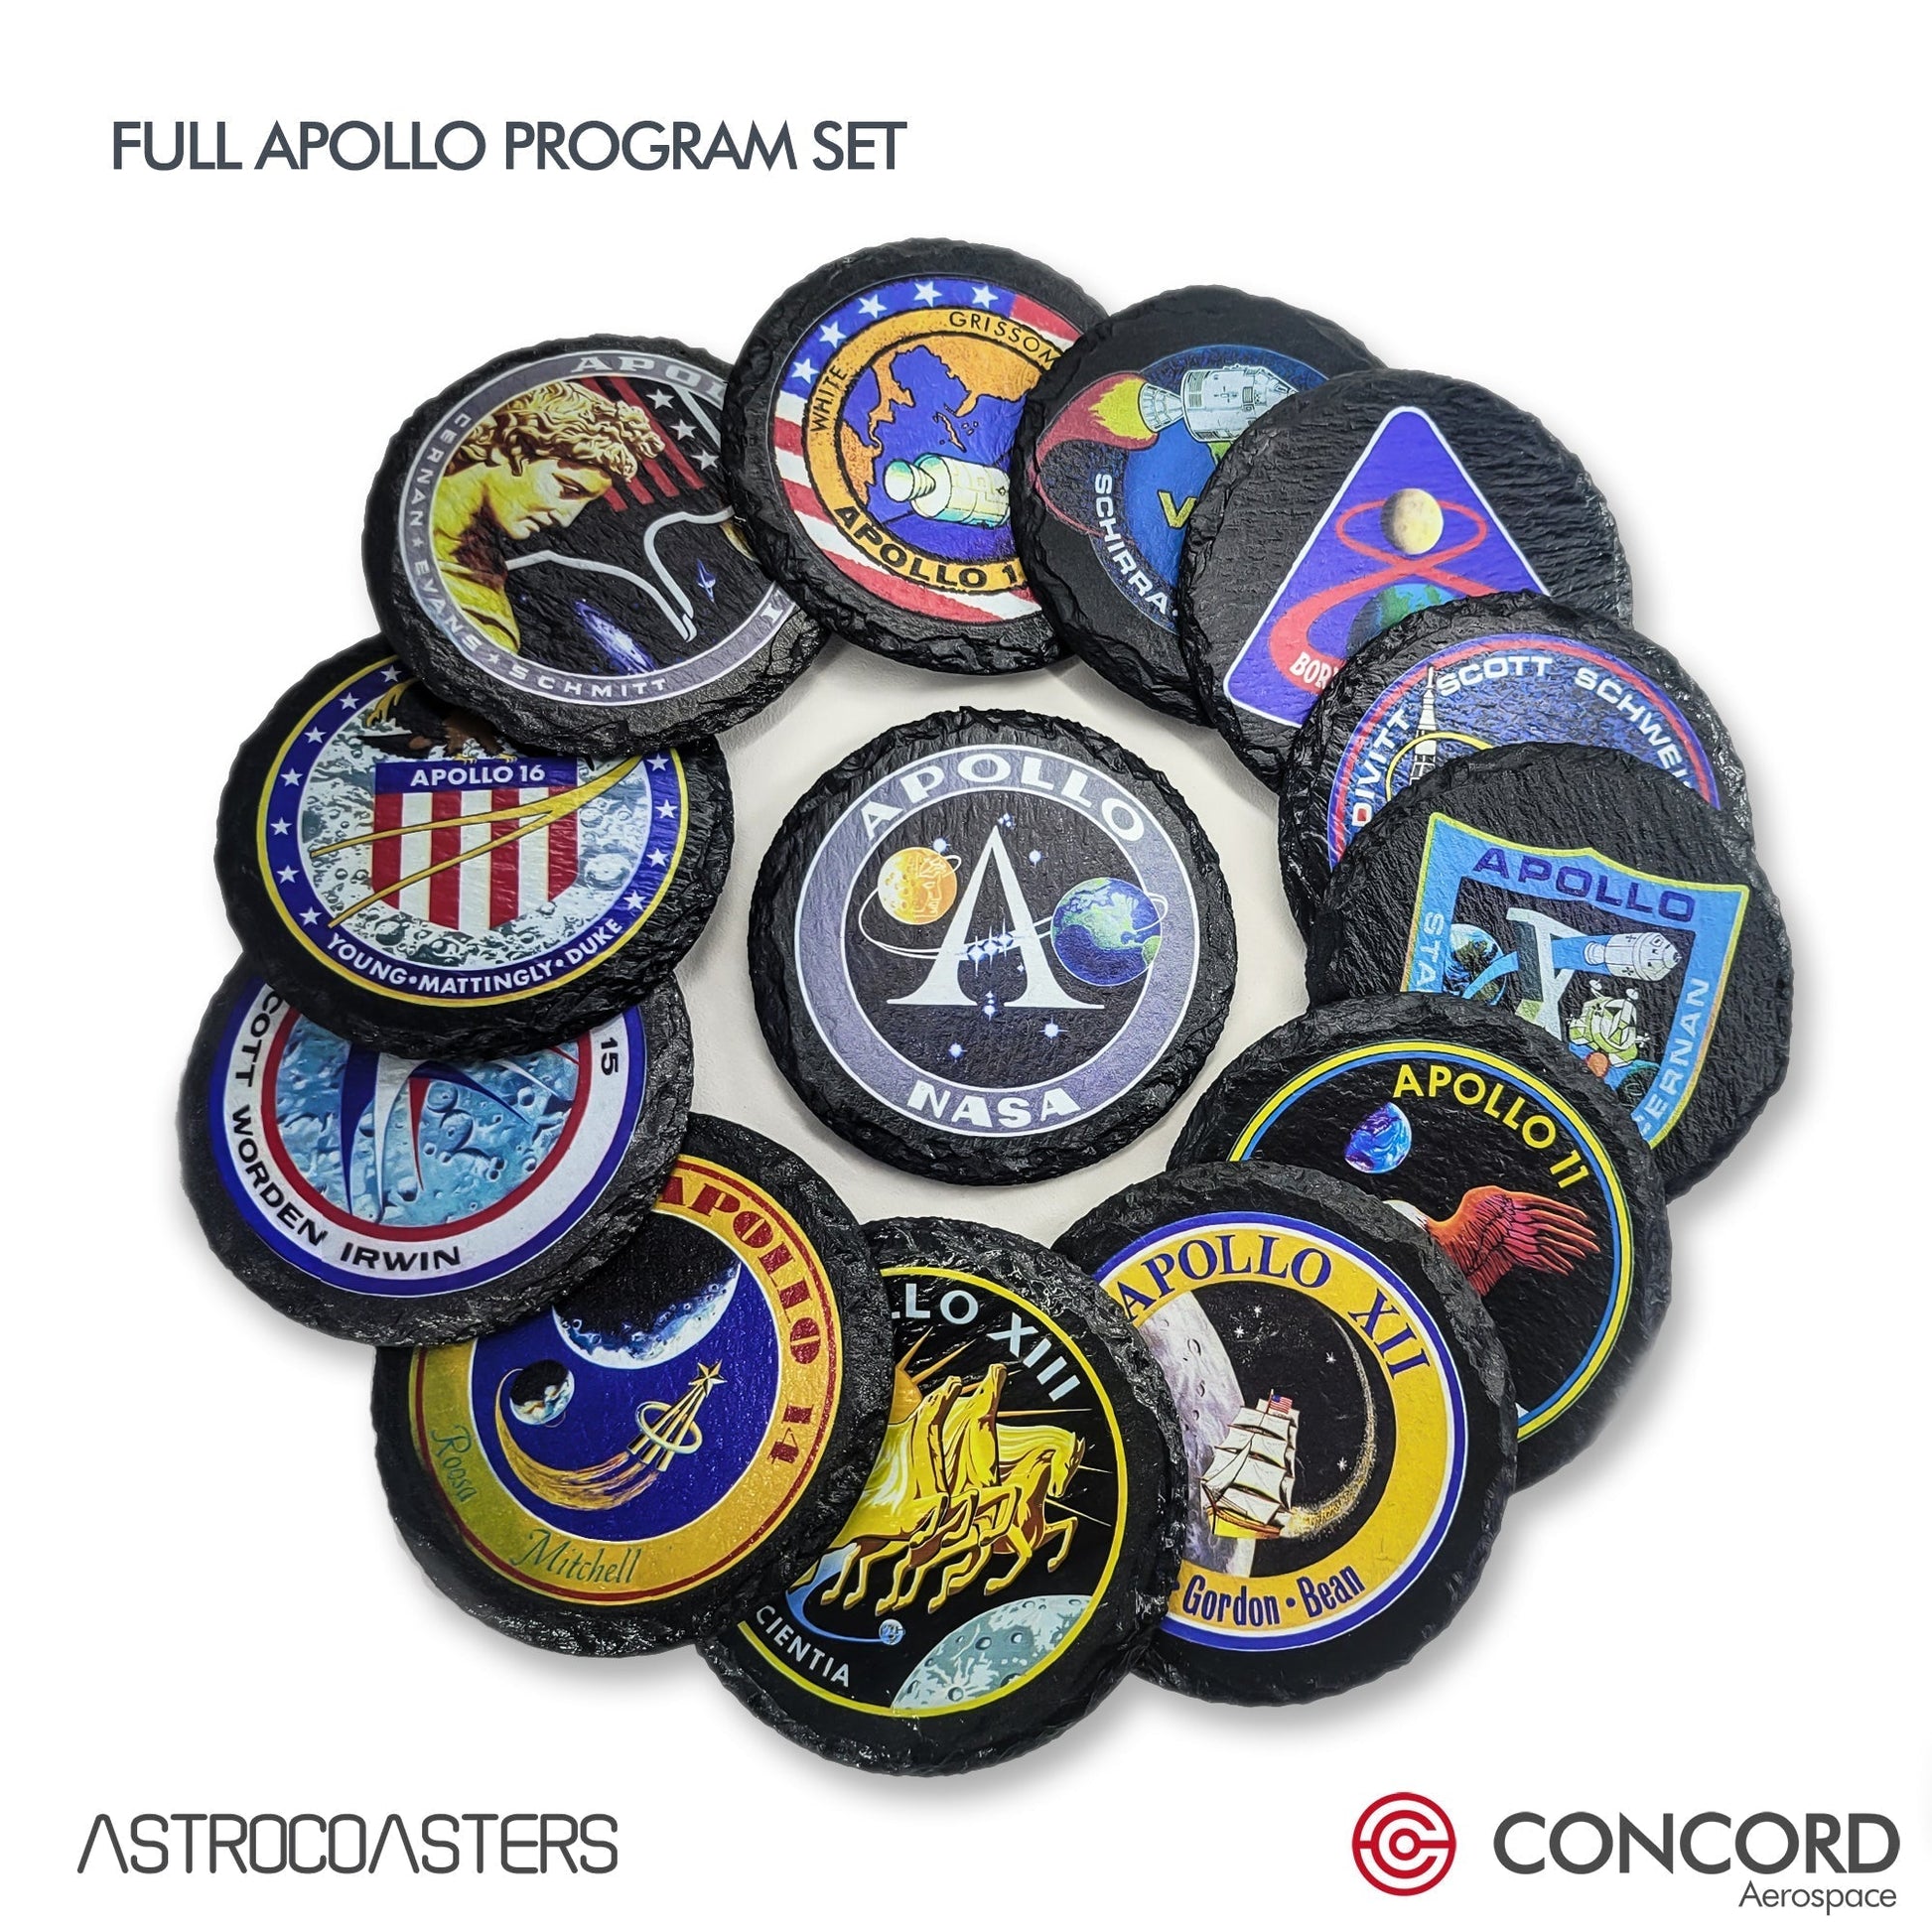 STS - 3 SPACE SHUTTLE - SLATE COASTER - Concord Aerospace Concord Aerospace Concord Aerospace Coasters